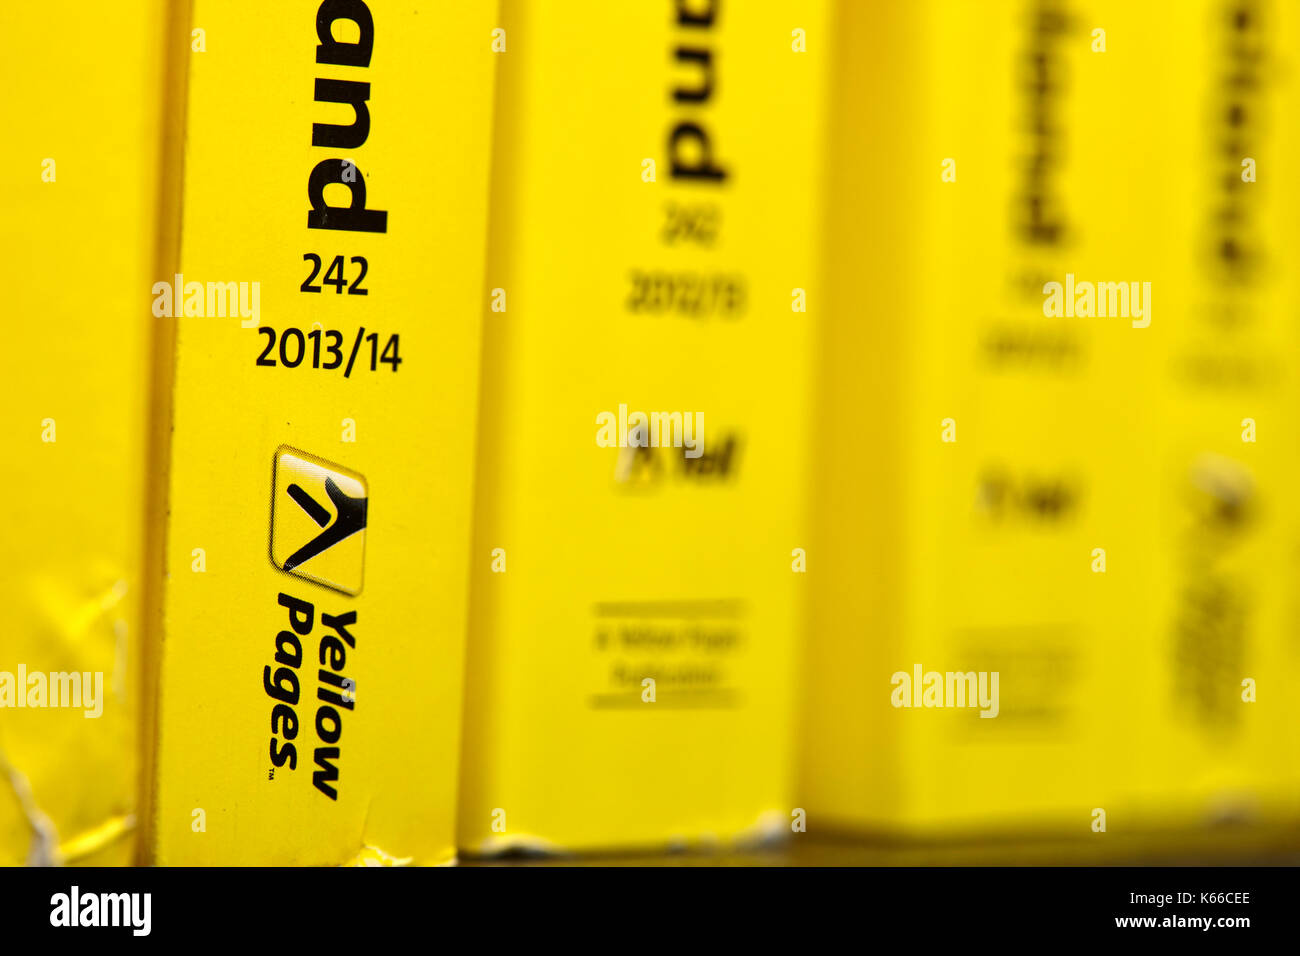 later smaller version of the yellow pages classified telephone directory paper edition uk Stock Photo